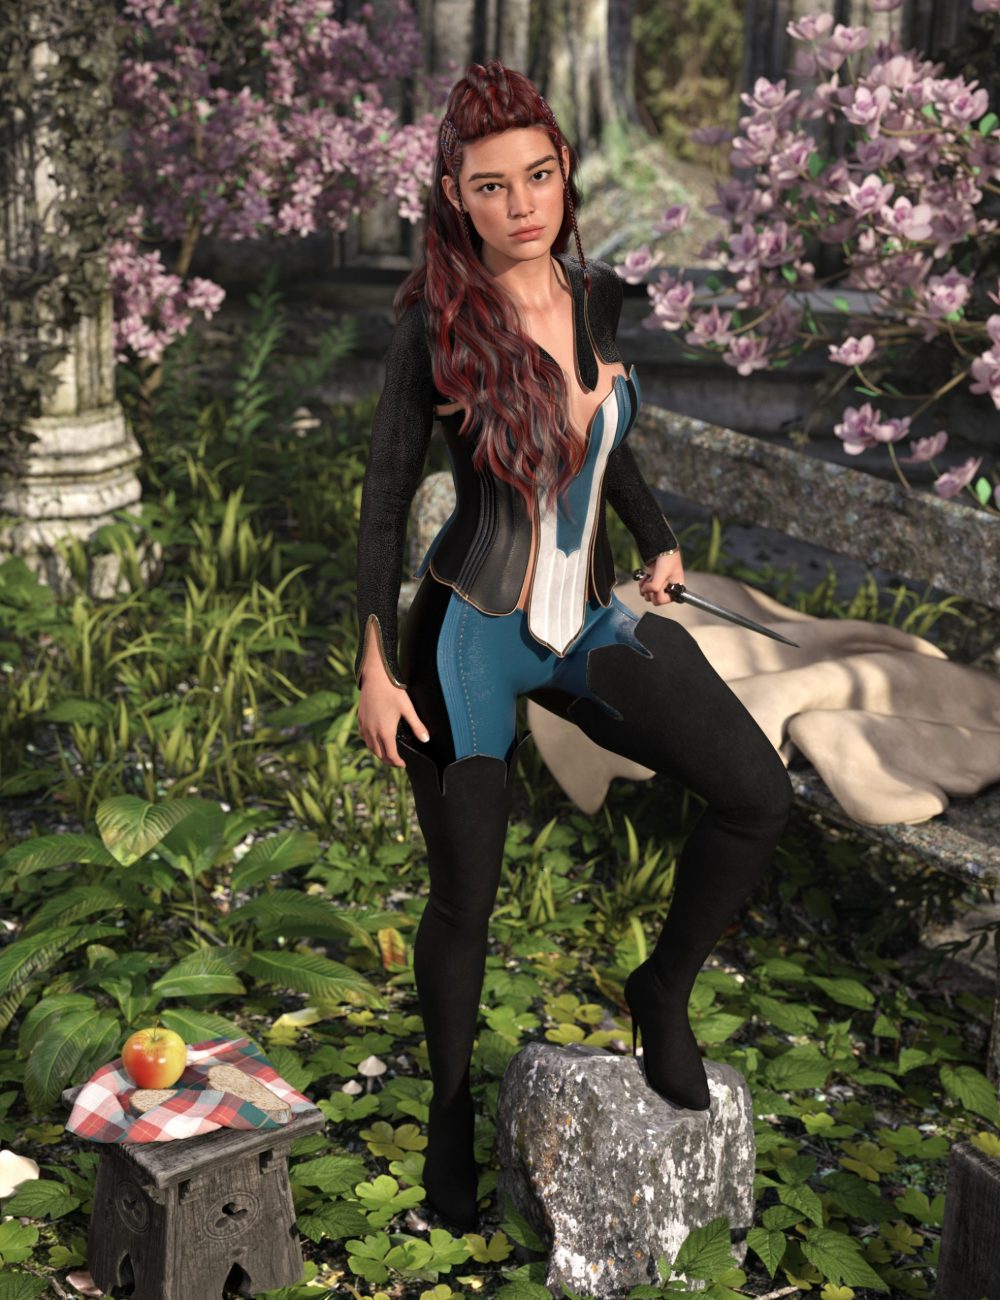 Silent Woods Fantasy Ranger Outfit for Genesis 8.1 Females